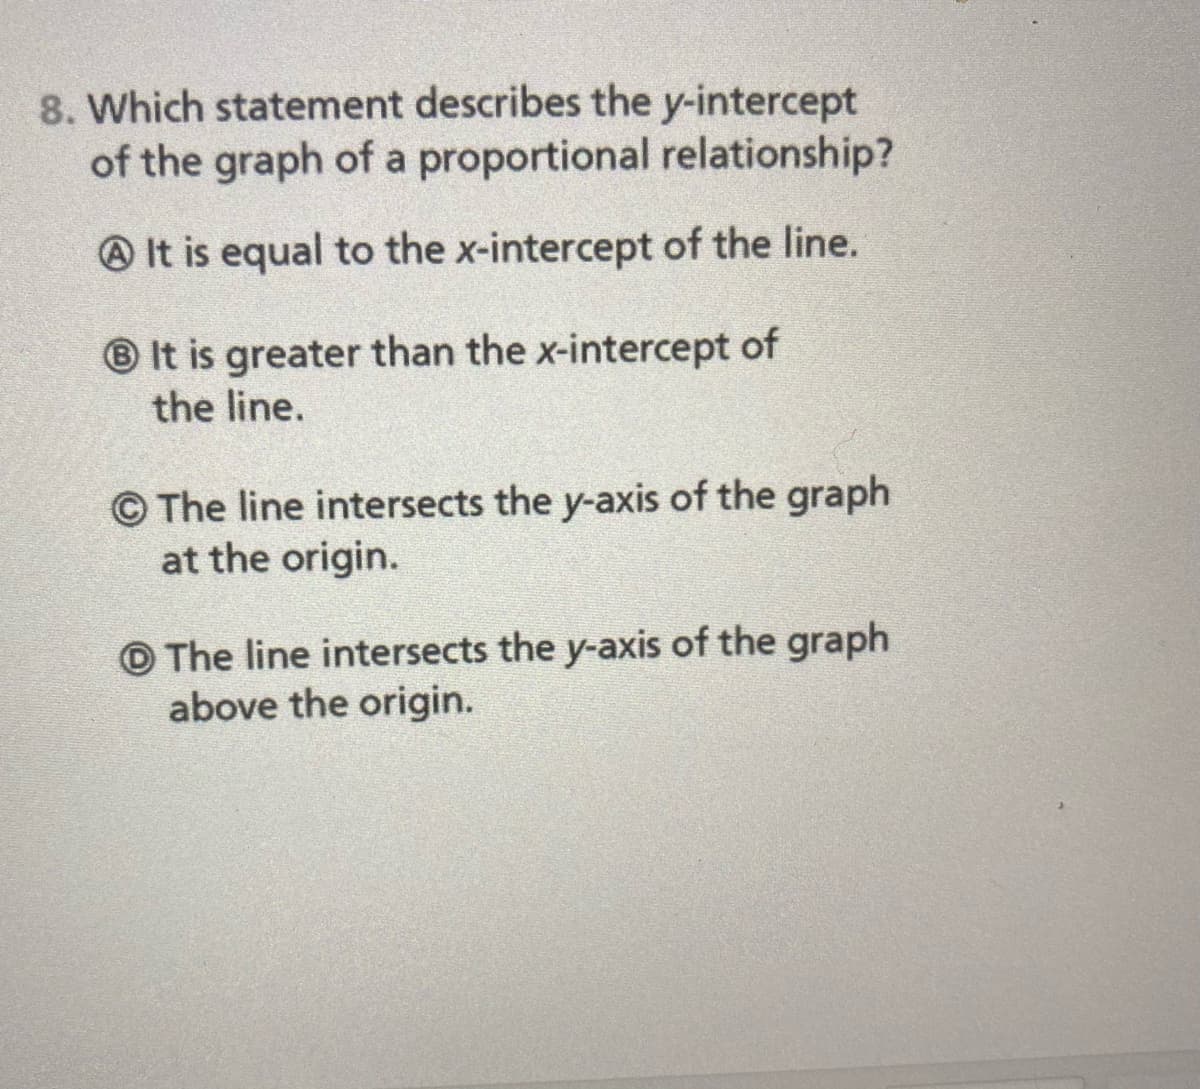 8. Which statement describes the y-intercept
of the graph of a proportional relationship?
O It is equal to the x-intercept of the line.
® It is greater than the x-intercept of
the line.
© The line intersects the y-axis of the graph
at the origin.
O The line intersects the y-axis of the graph
above the origin.
